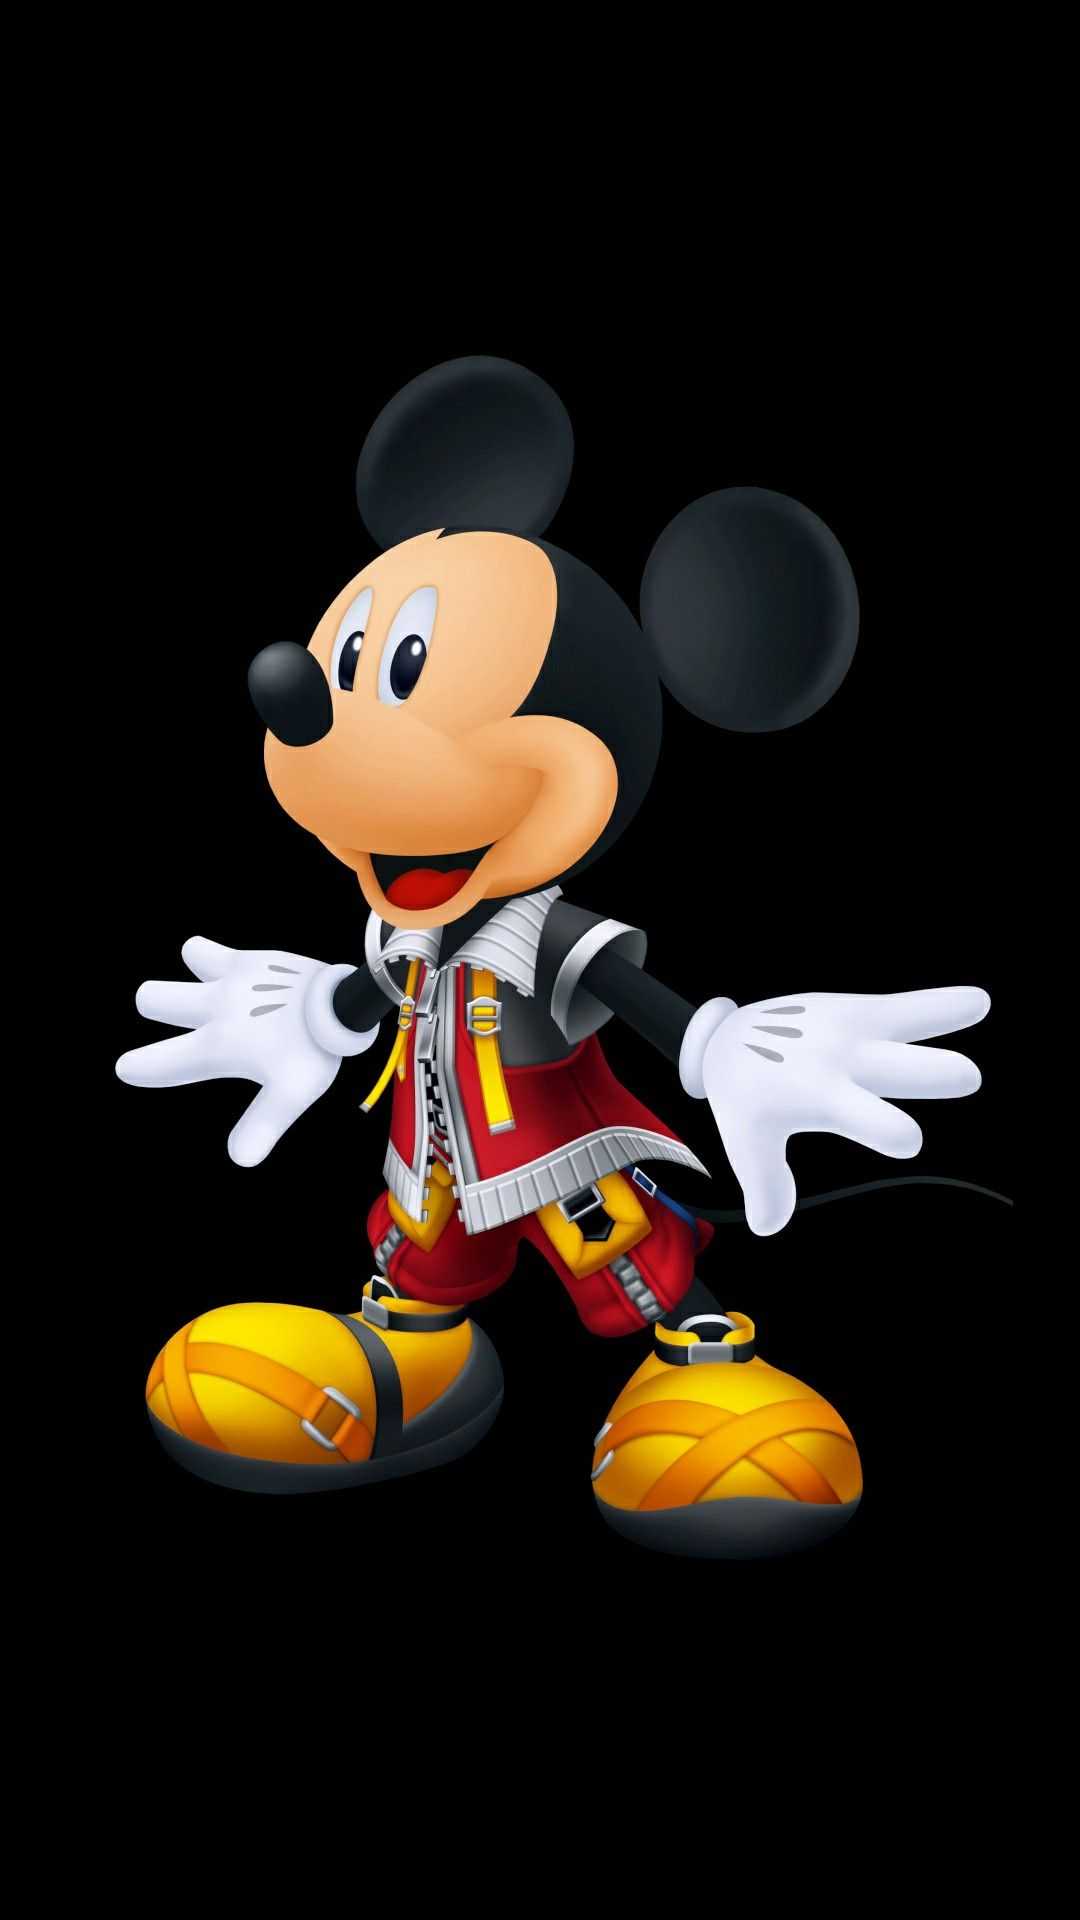 Mickey Mouse Wallpaper - VoBss